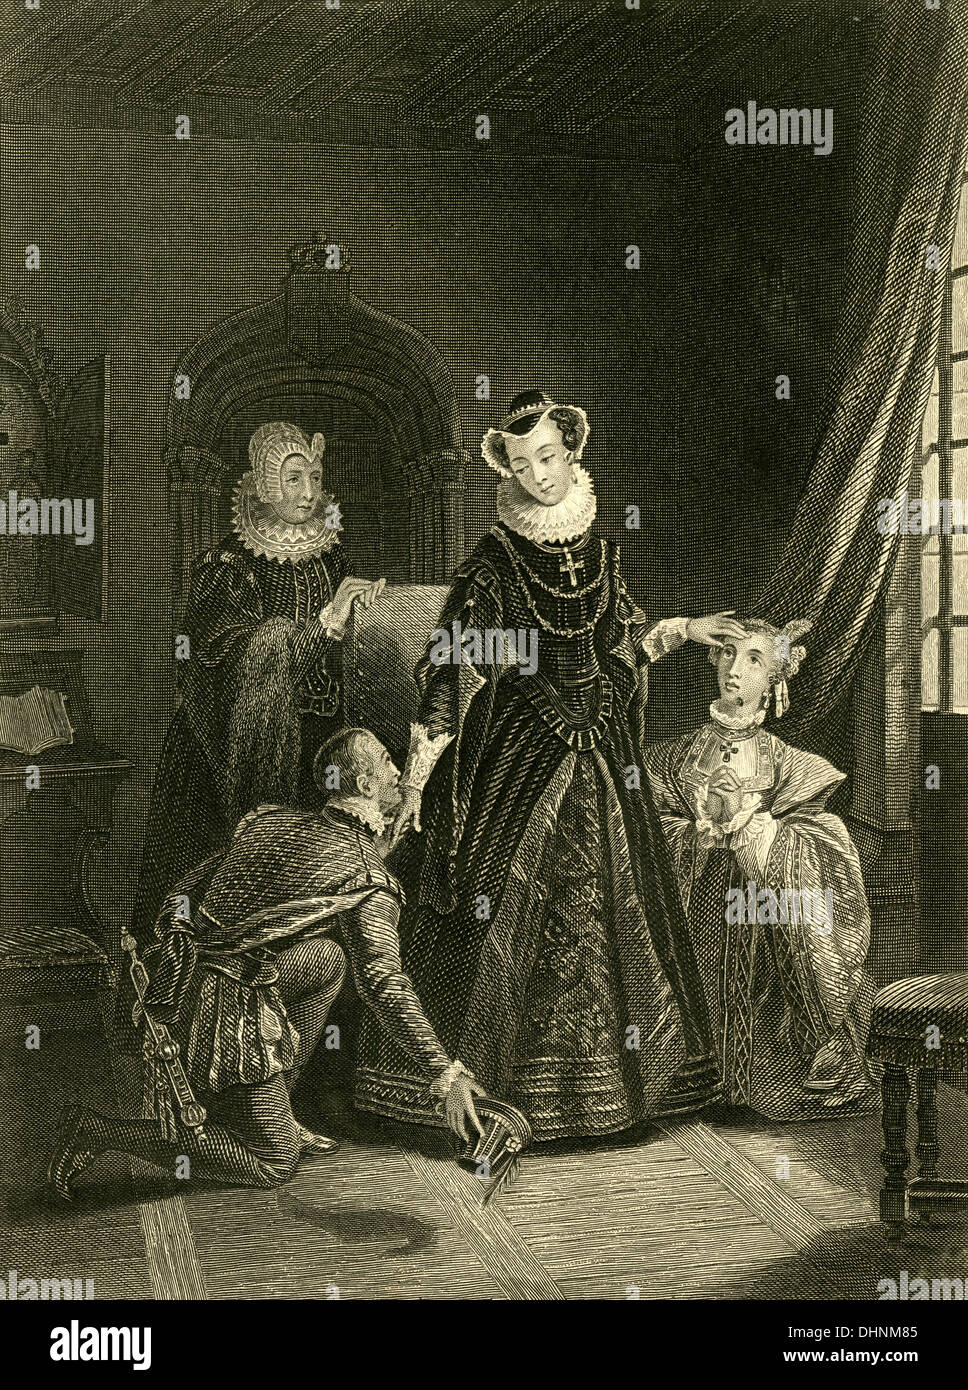 Circa 1880s steel engraving, Mary Queen of Scots at Loch Leven Castle. Stock Photo